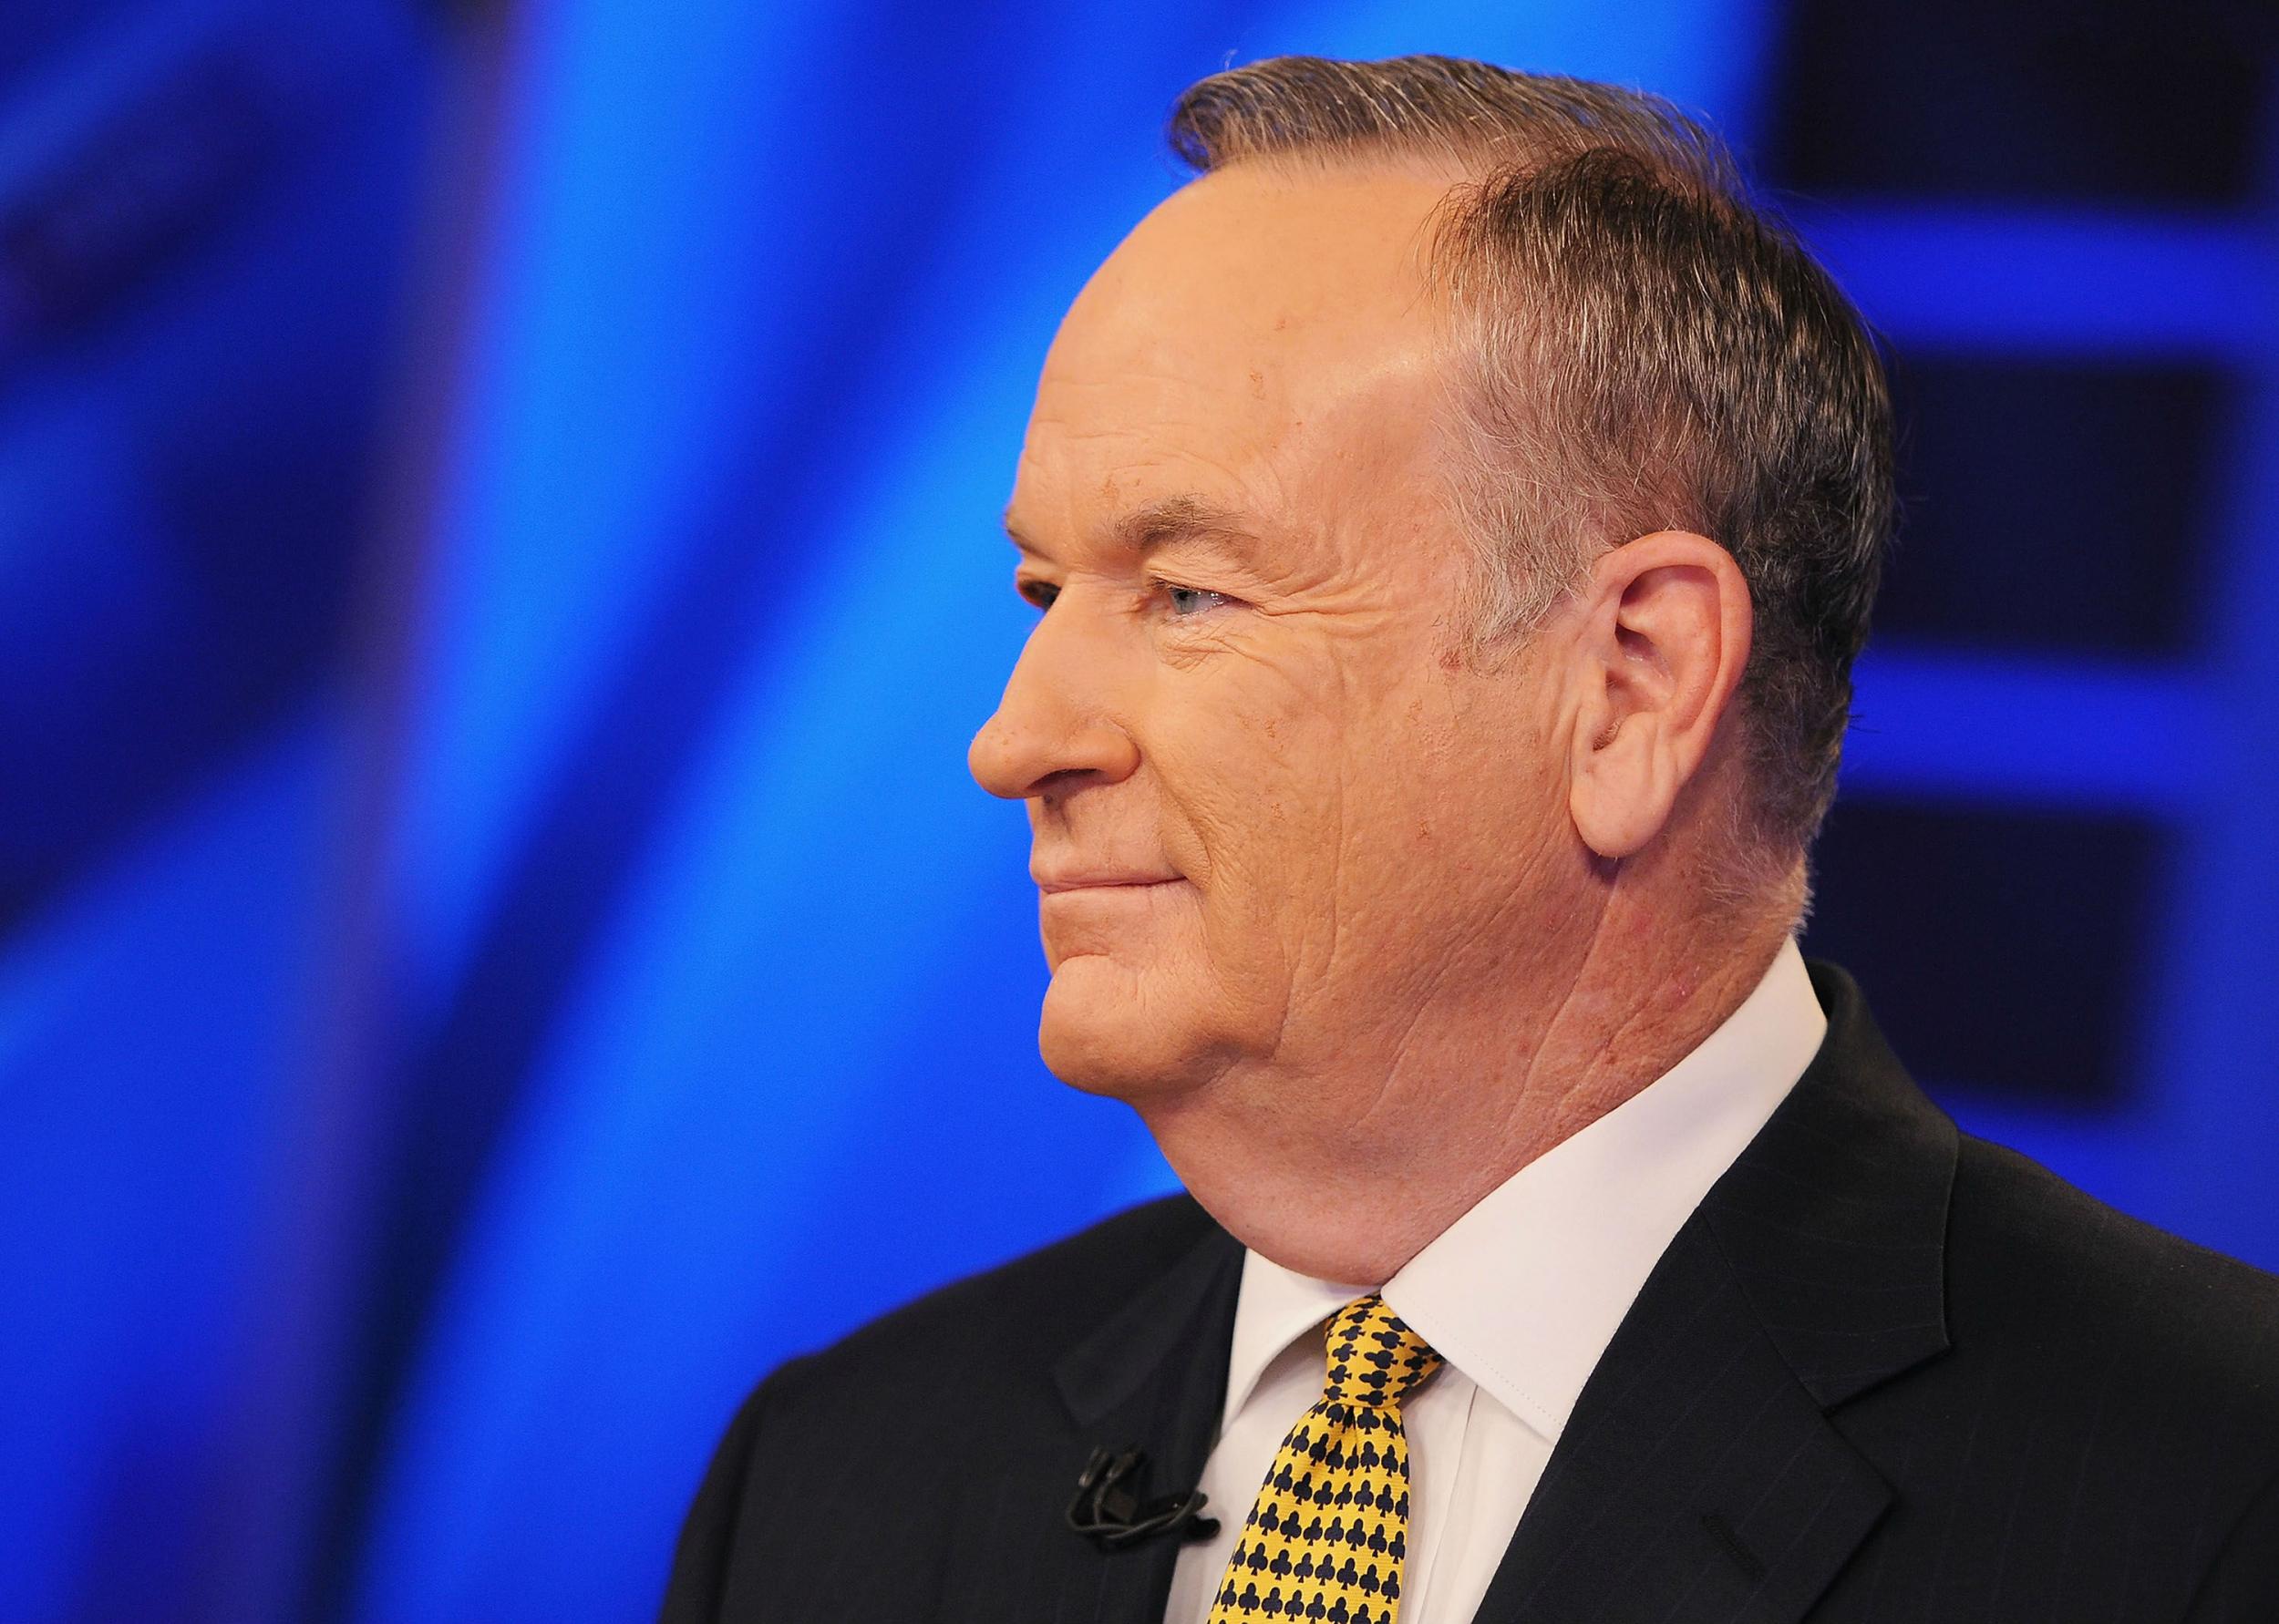 Bill O’Reilly Fox News host loses custody of his children after